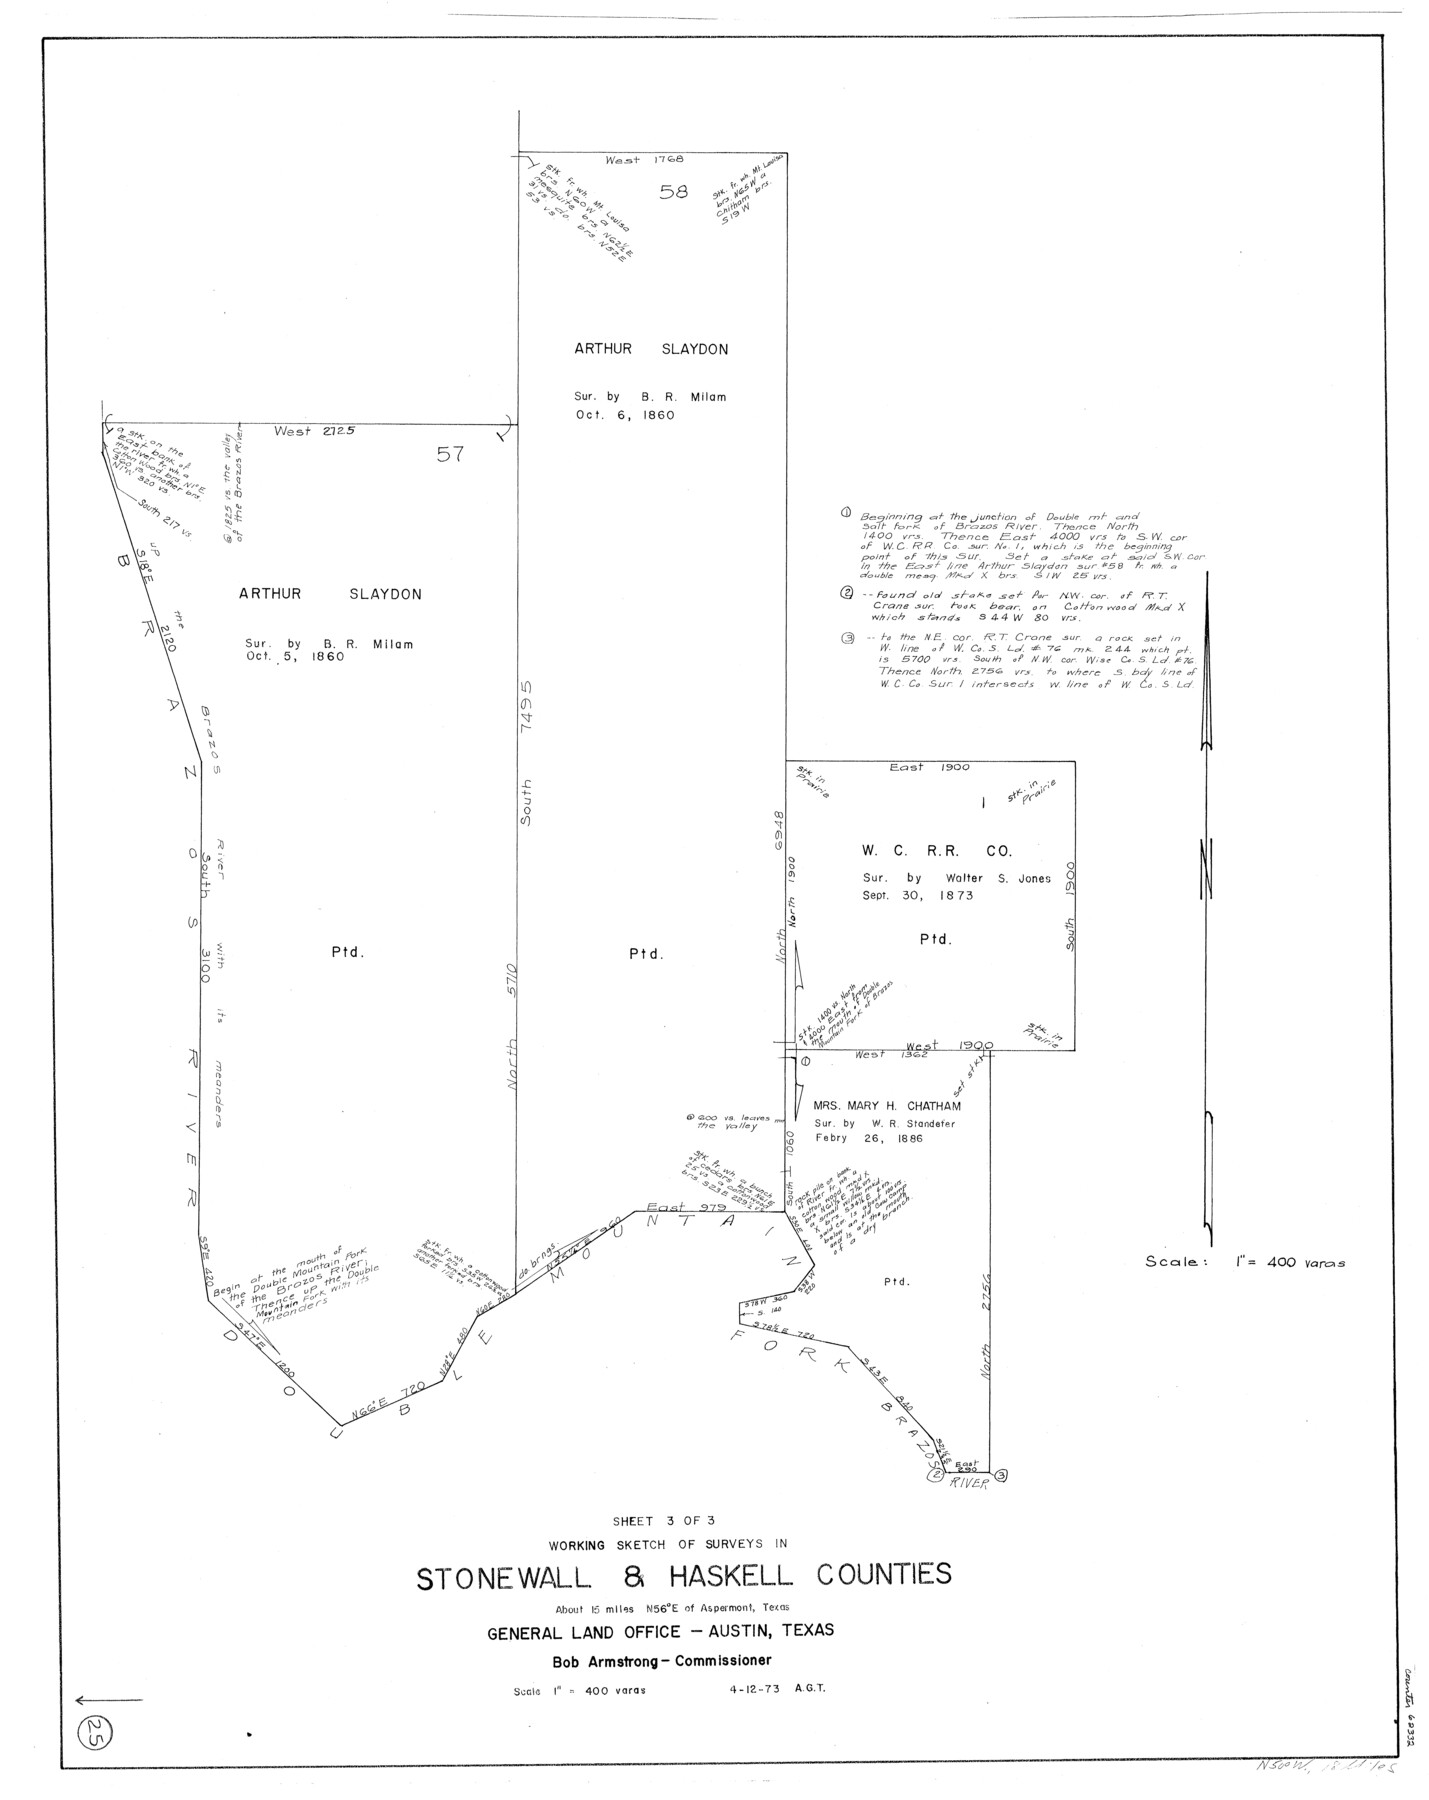 62332, Stonewall County Working Sketch 25, General Map Collection